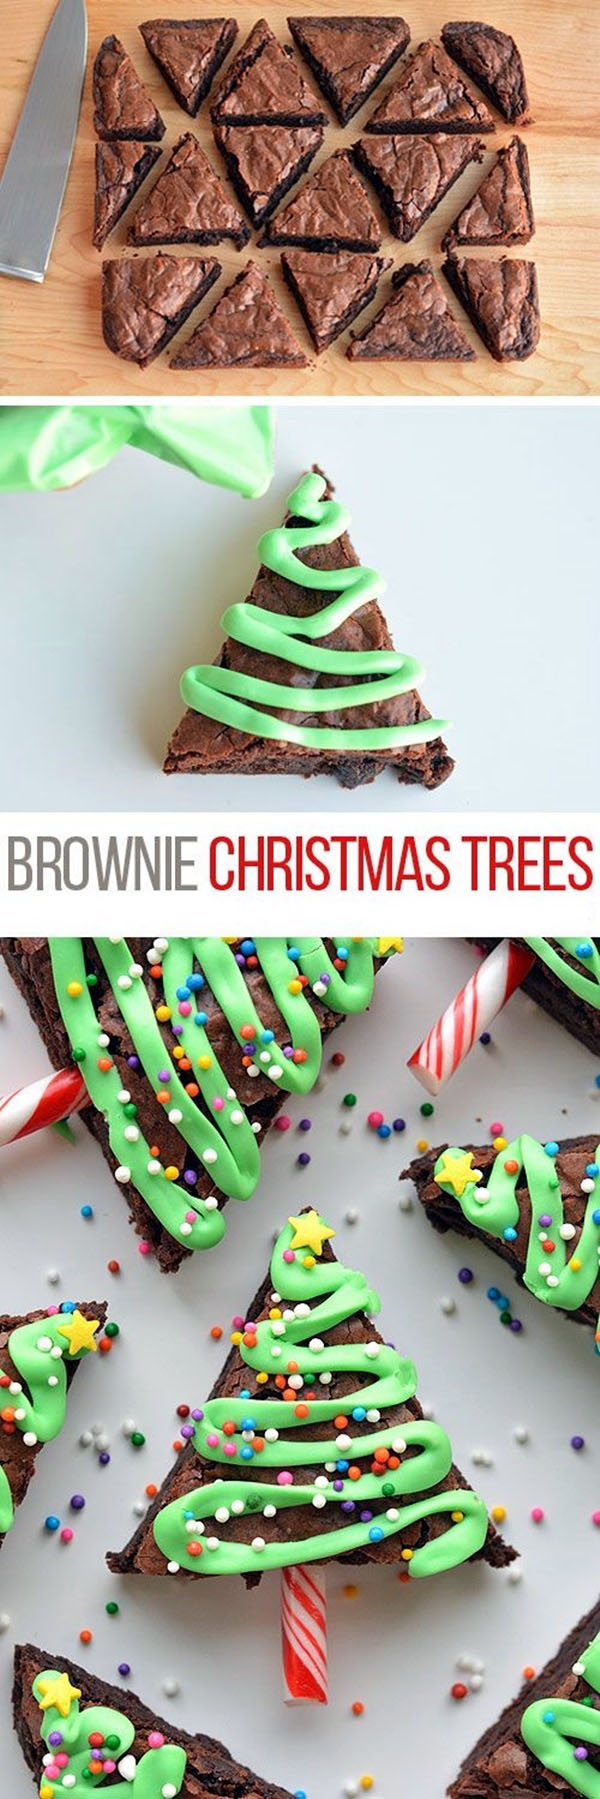 clever-christmas-food-ideas-9